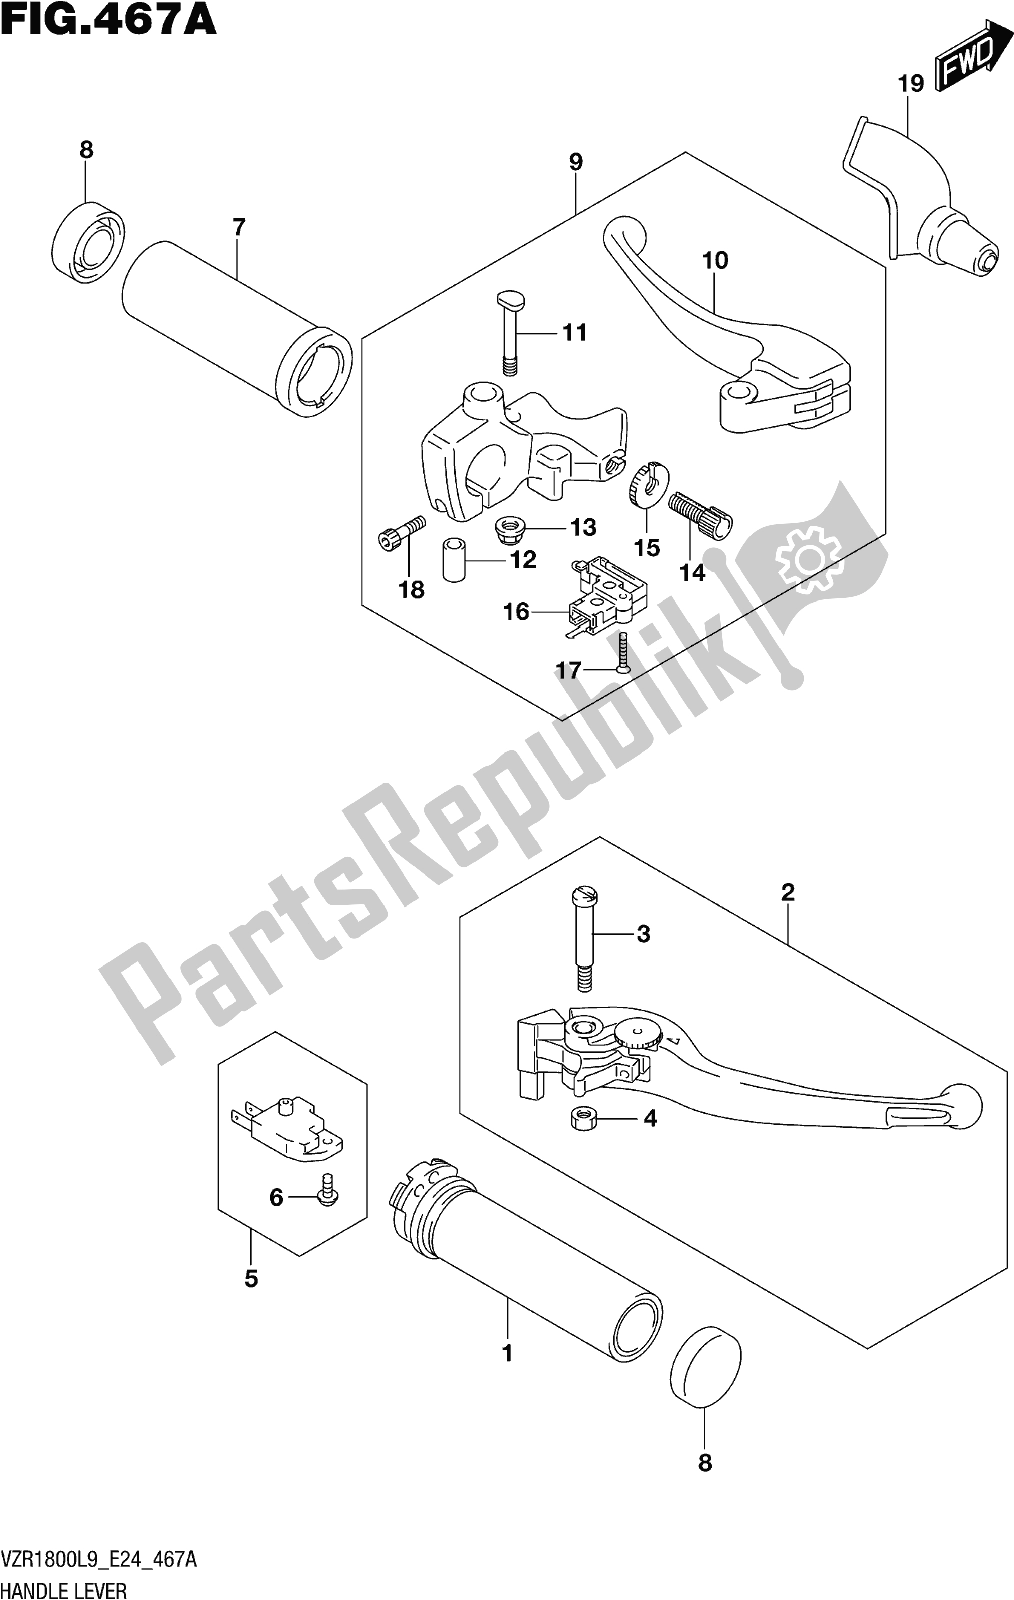 All parts for the Fig. 467a Handle Lever (vzr1800l9 E24) of the Suzuki VZR 1800 2019